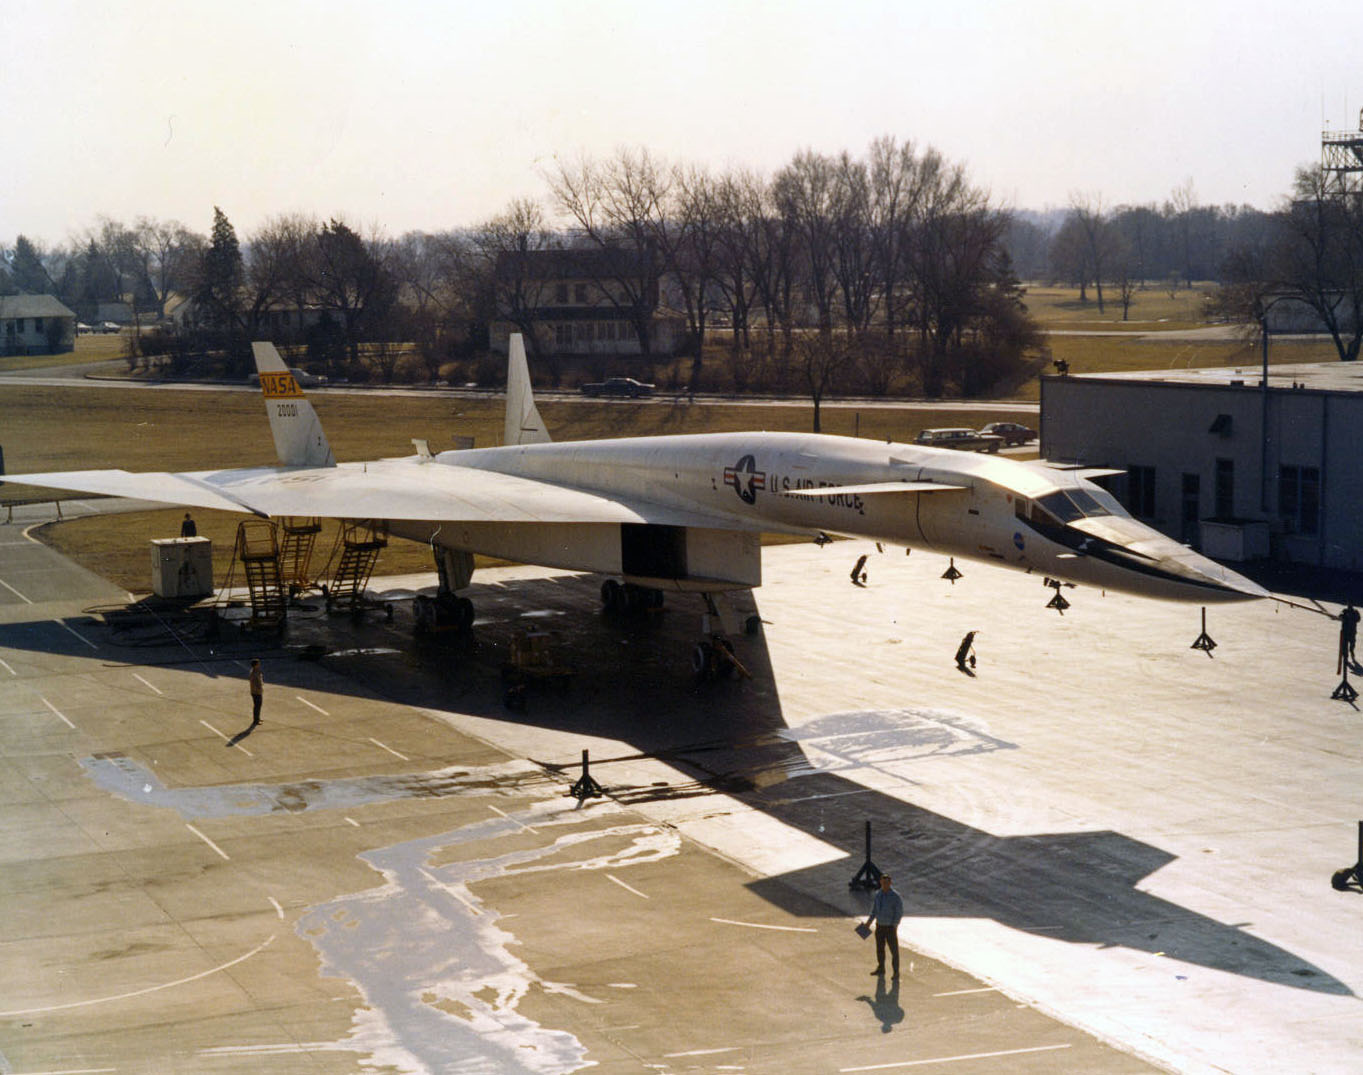 North American Aviation XB-70A-1-NA Valkyrie 62-0001 at Wright-Patterson Air Force Base, Ohio. (U.S. Air Force)